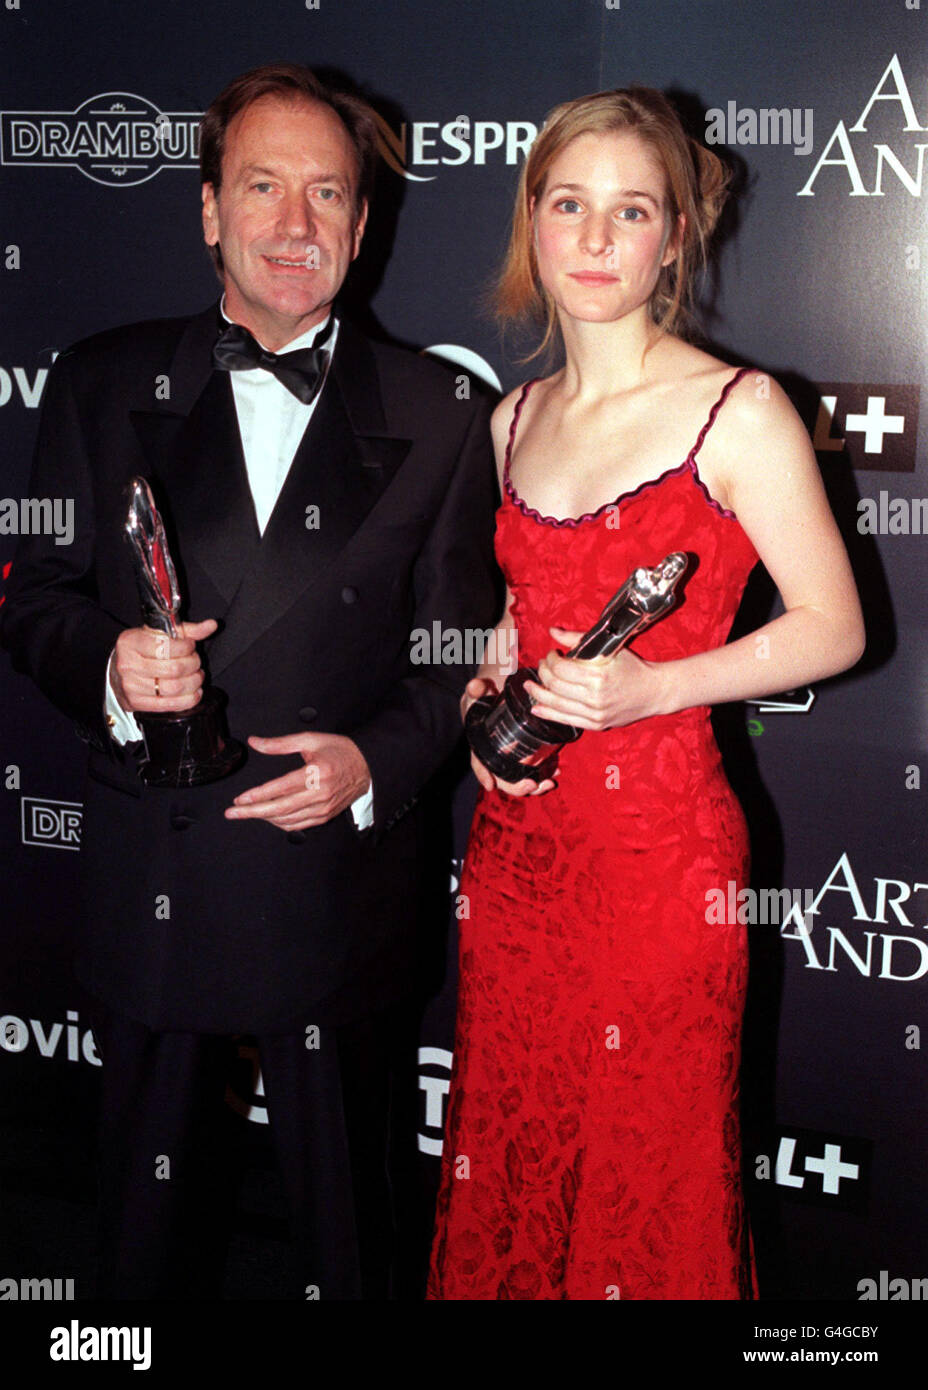 PA NEWS PHOTO 5/12/98 BELGIAN ACTRESS NATACHA REGNIER AT THE EUROPEAN FILM AWARDS, HELD AT LONDON'S OLD VIC THEATRE. Stock Photo